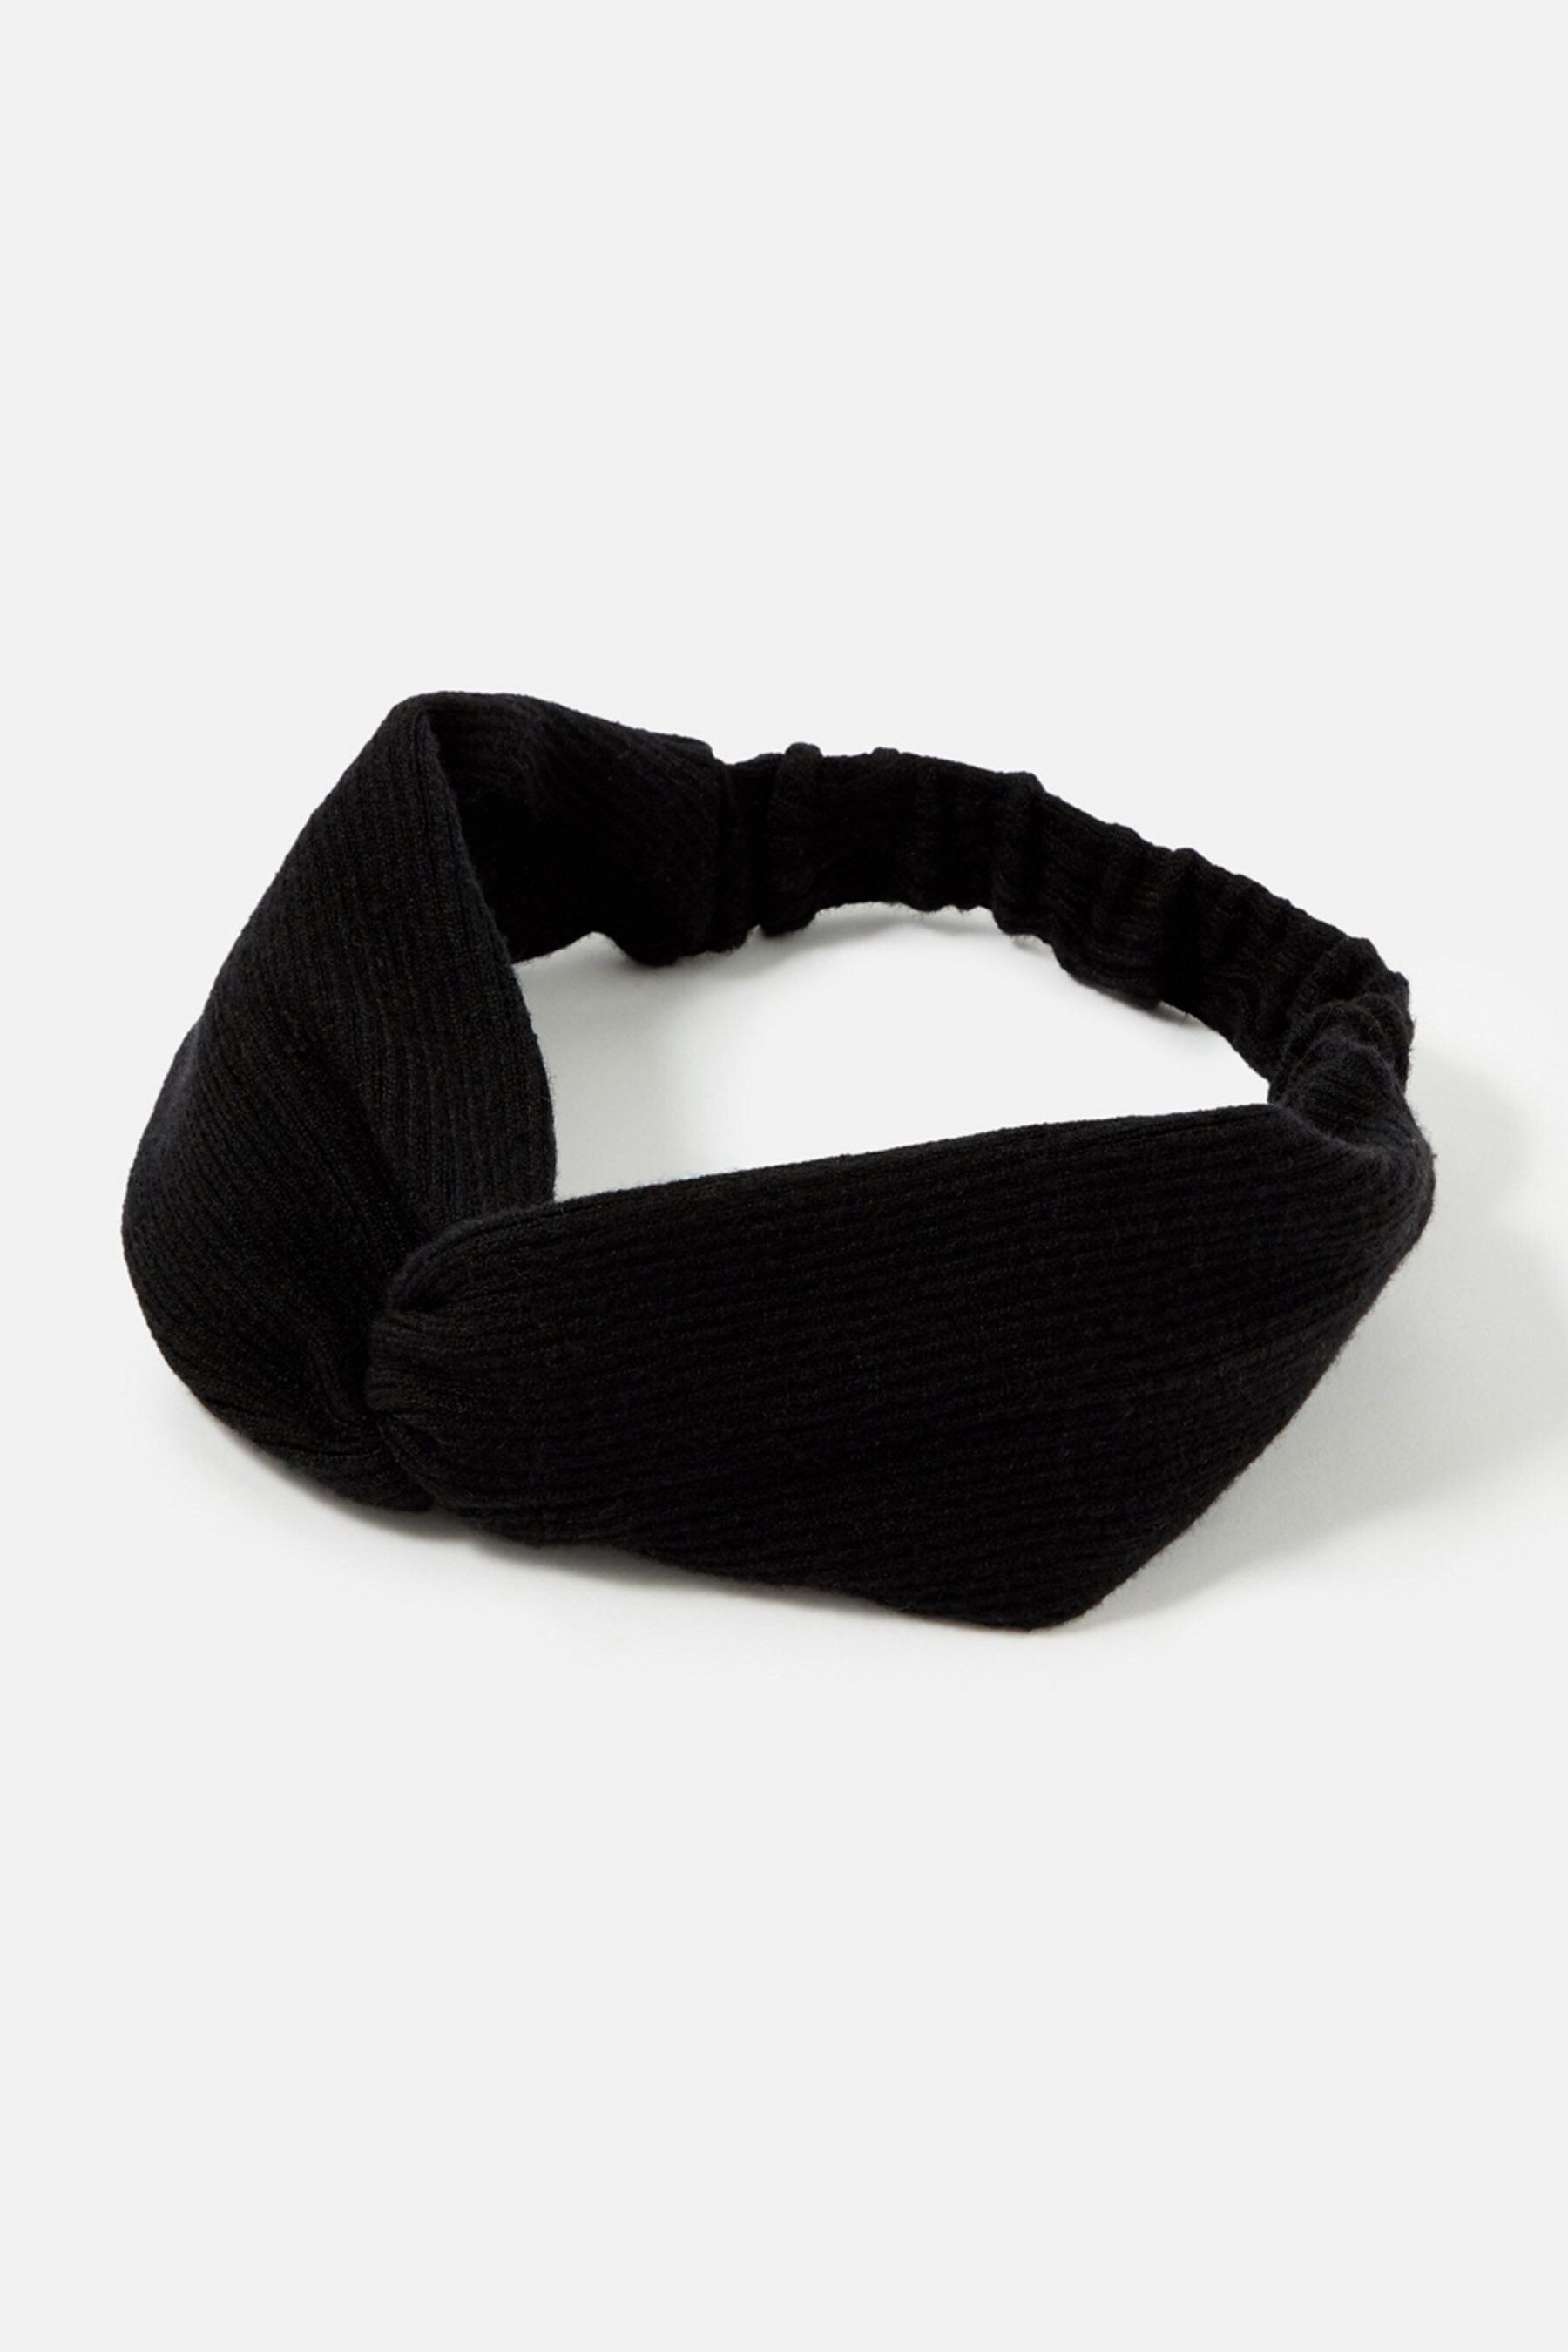 Buy Accessorize Black Lounge Knit Bando from the Next UK online shop